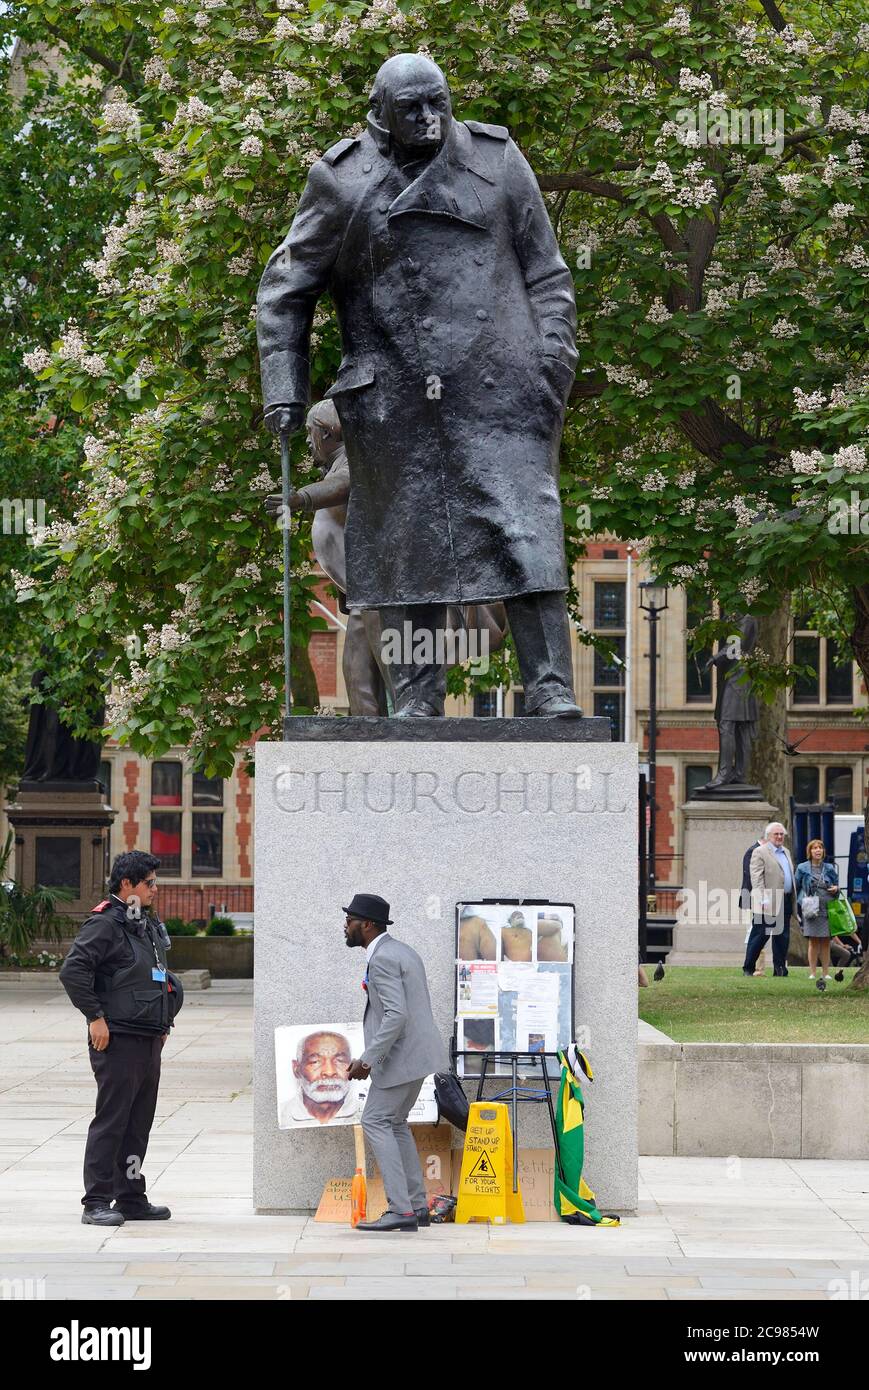 London, England, UK. Lone Windrush demonstrator arguing with a Heritage Warden in Parliament Square about his activities by the Churchill statue Stock Photo